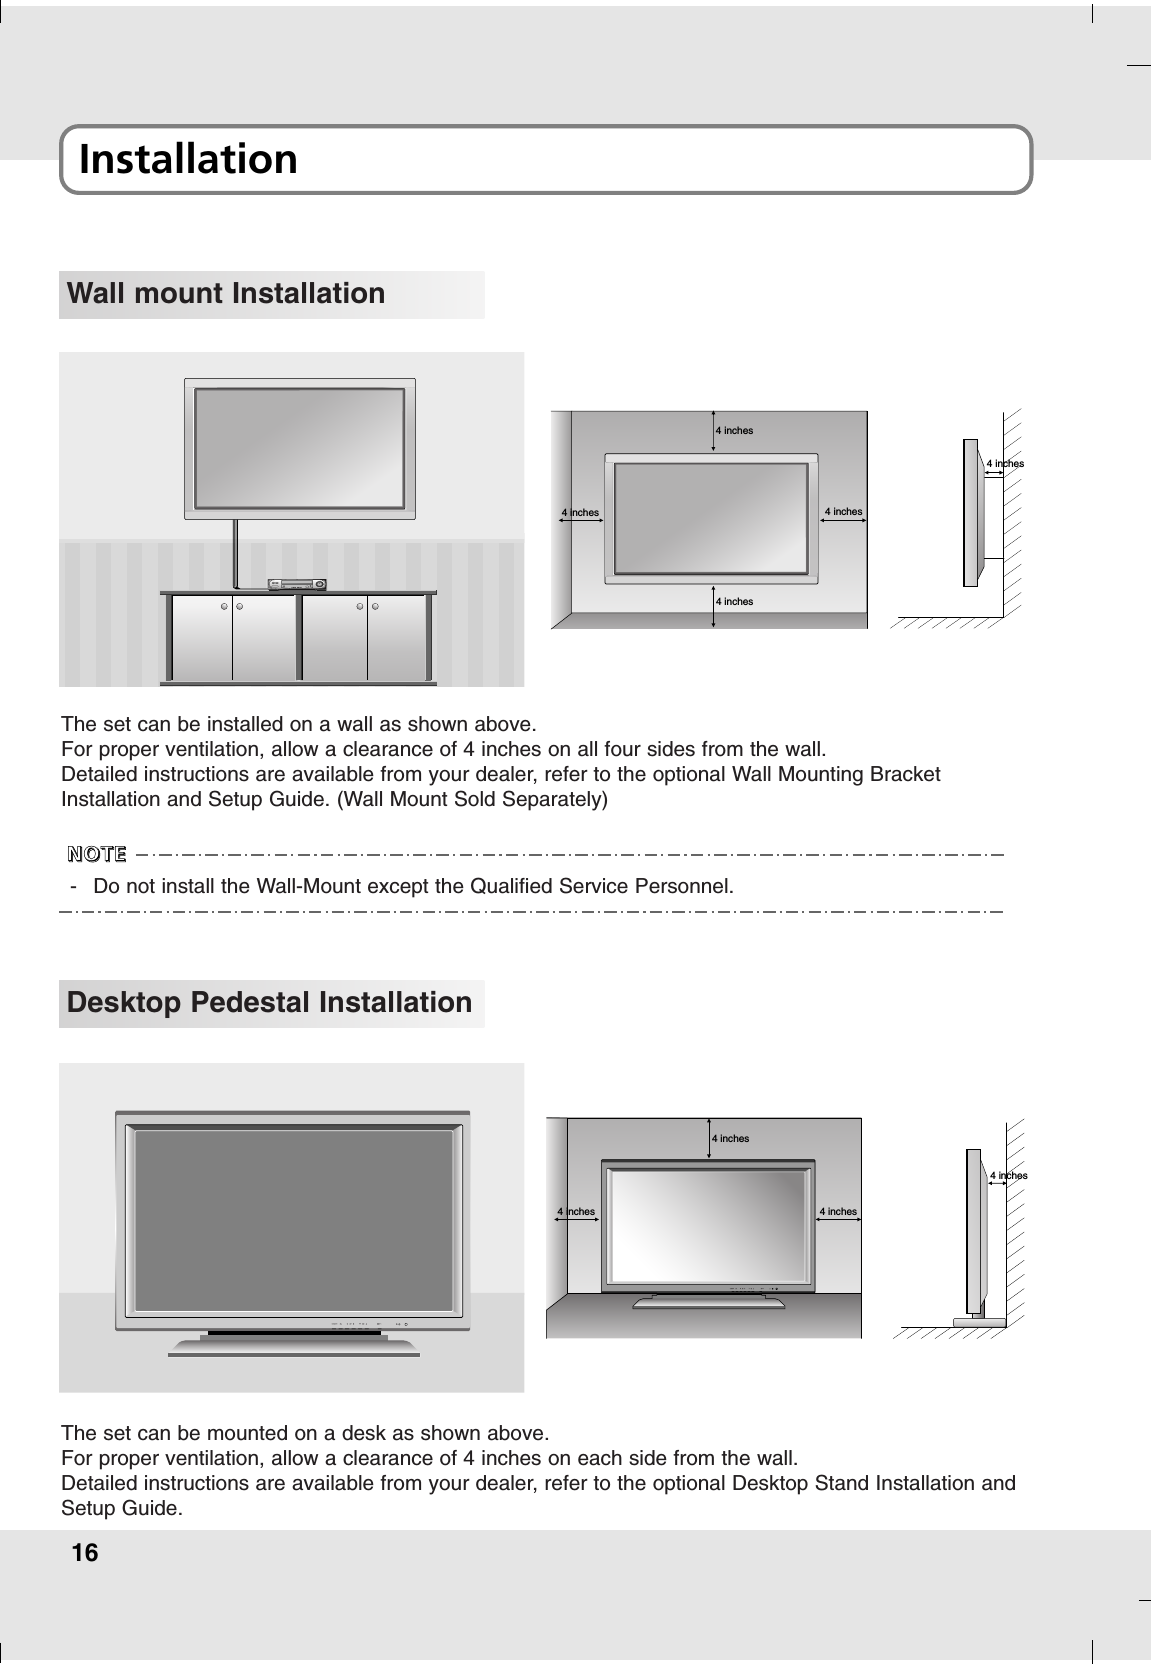 16Installation Wall mount Installation4 inches4 inches4 inches4 inches4 inchesThe set can be installed on a wall as shown above.For proper ventilation, allow a clearance of 4 inches on all four sides from the wall.Detailed instructions are available from your dealer, refer to the optional Wall Mounting BracketInstallation and Setup Guide. (Wall Mount Sold Separately)Desktop Pedestal Installation4 inches4 inches4 inches4 inchesThe set can be mounted on a desk as shown above.For proper ventilation, allow a clearance of 4 inches on each side from the wall.Detailed instructions are available from your dealer, refer to the optional Desktop Stand Installation andSetup Guide.-Do not install the Wall-Mount except the Qualified Service Personnel. NNNNOOOOTTTTEEEE